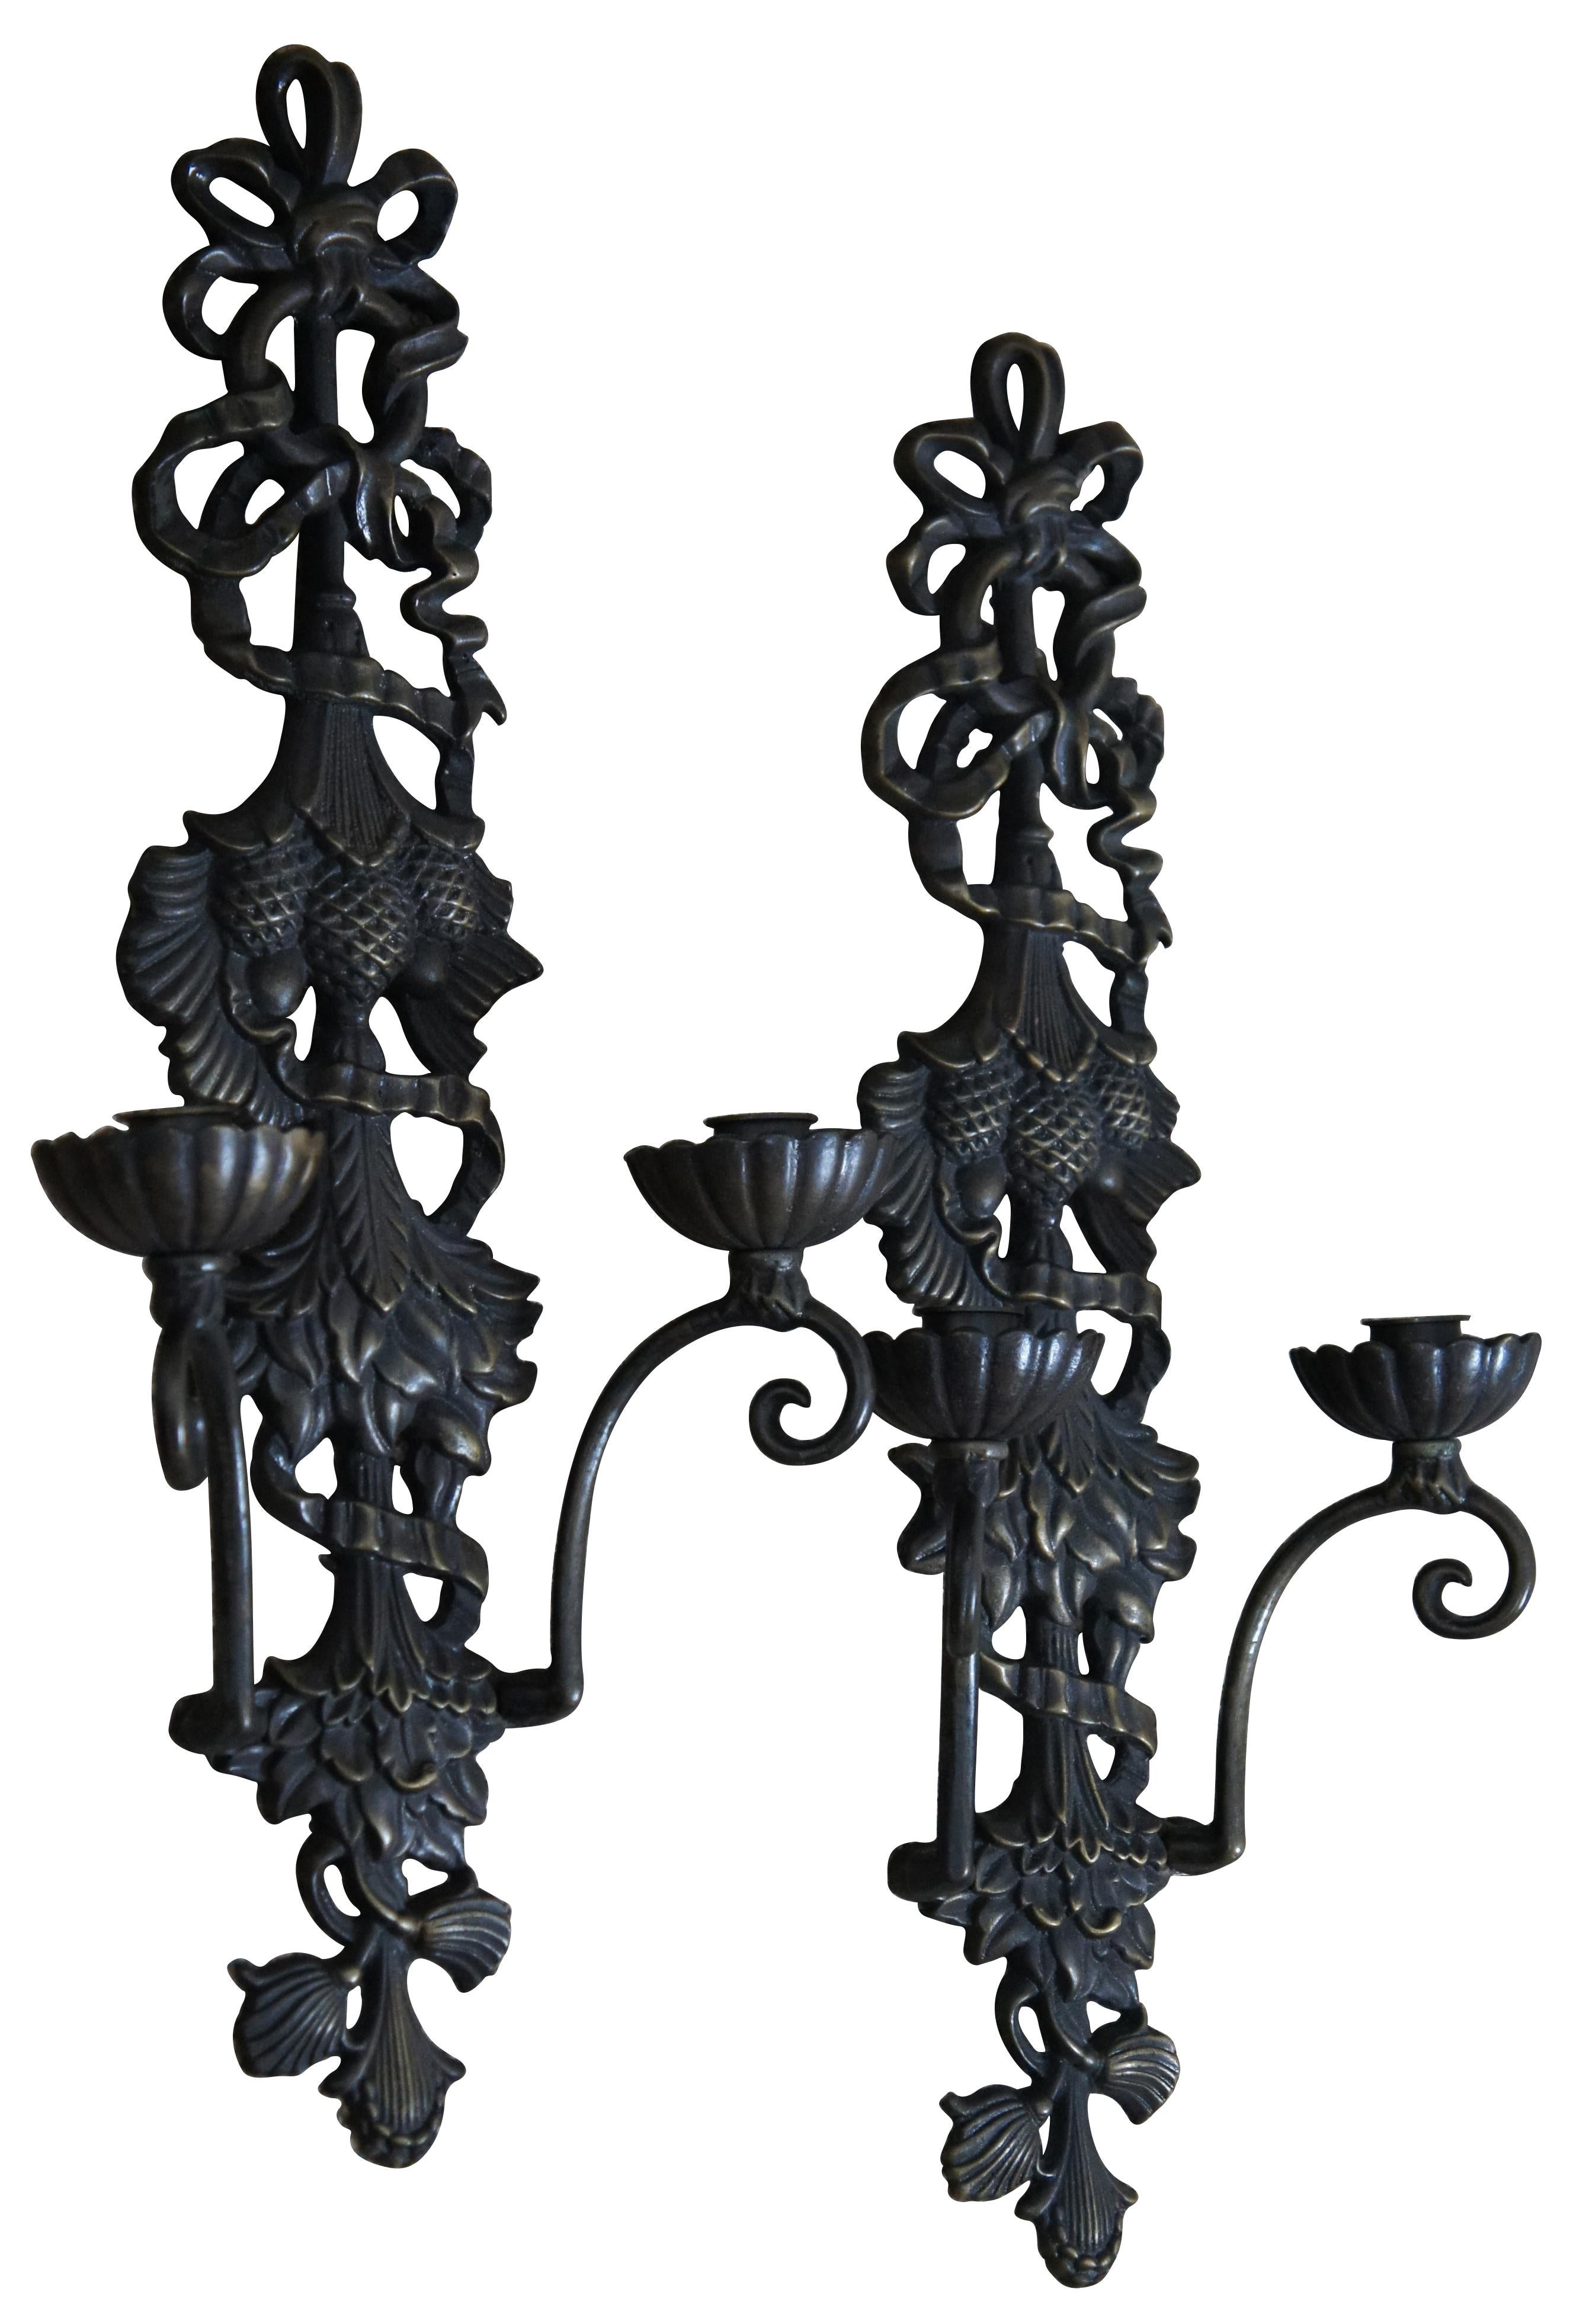 Pair of vintage bronze two light candle sconces featuring a Victorian design of ribbons, leaves and pine cones. Size: 21